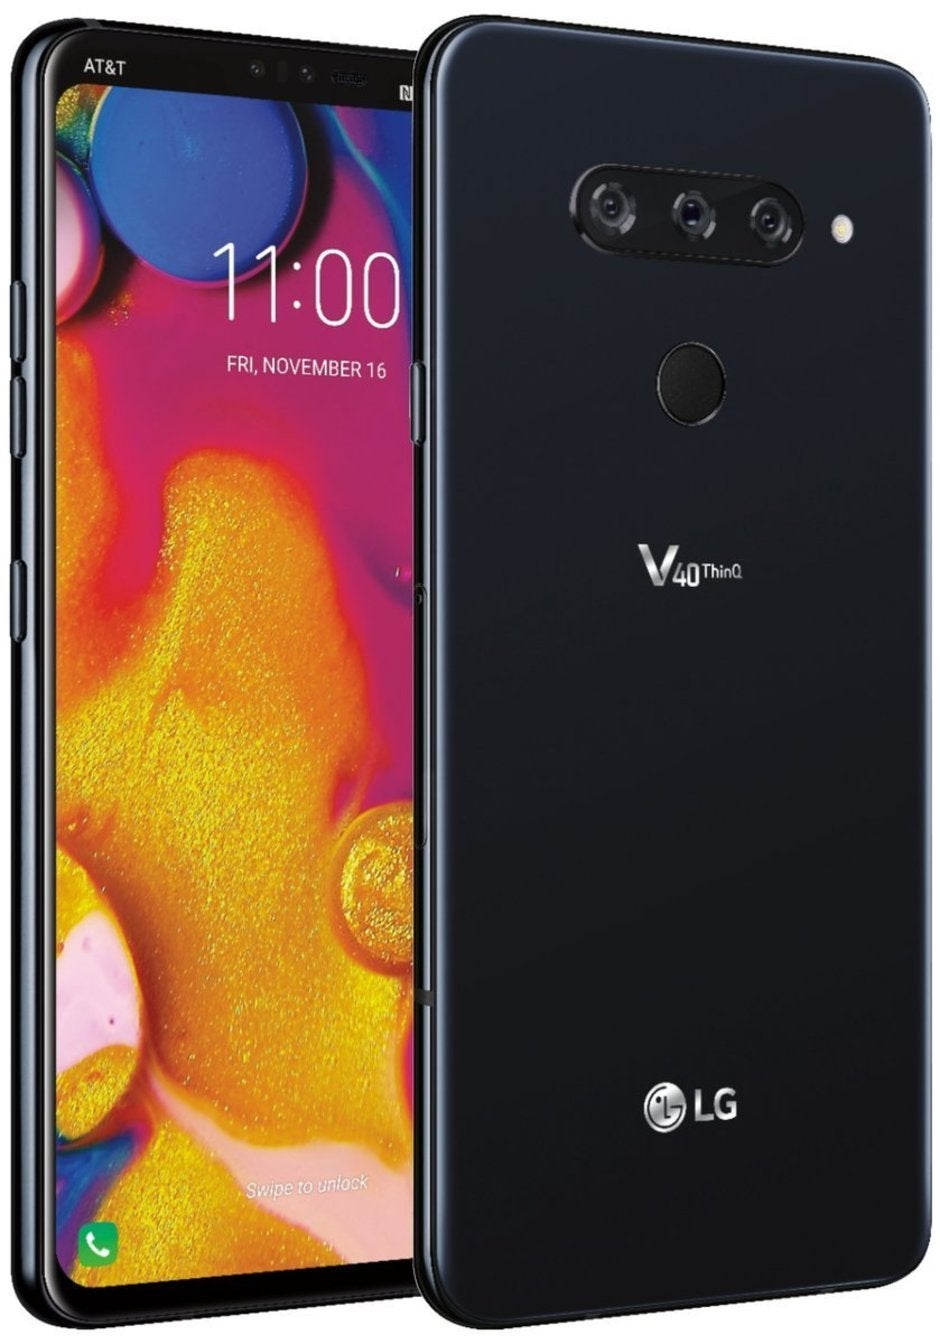 The LG V40 for AT&amp;T - LG V40 ThinQ rumor review: specs and release of LG's 4th flagship for the year